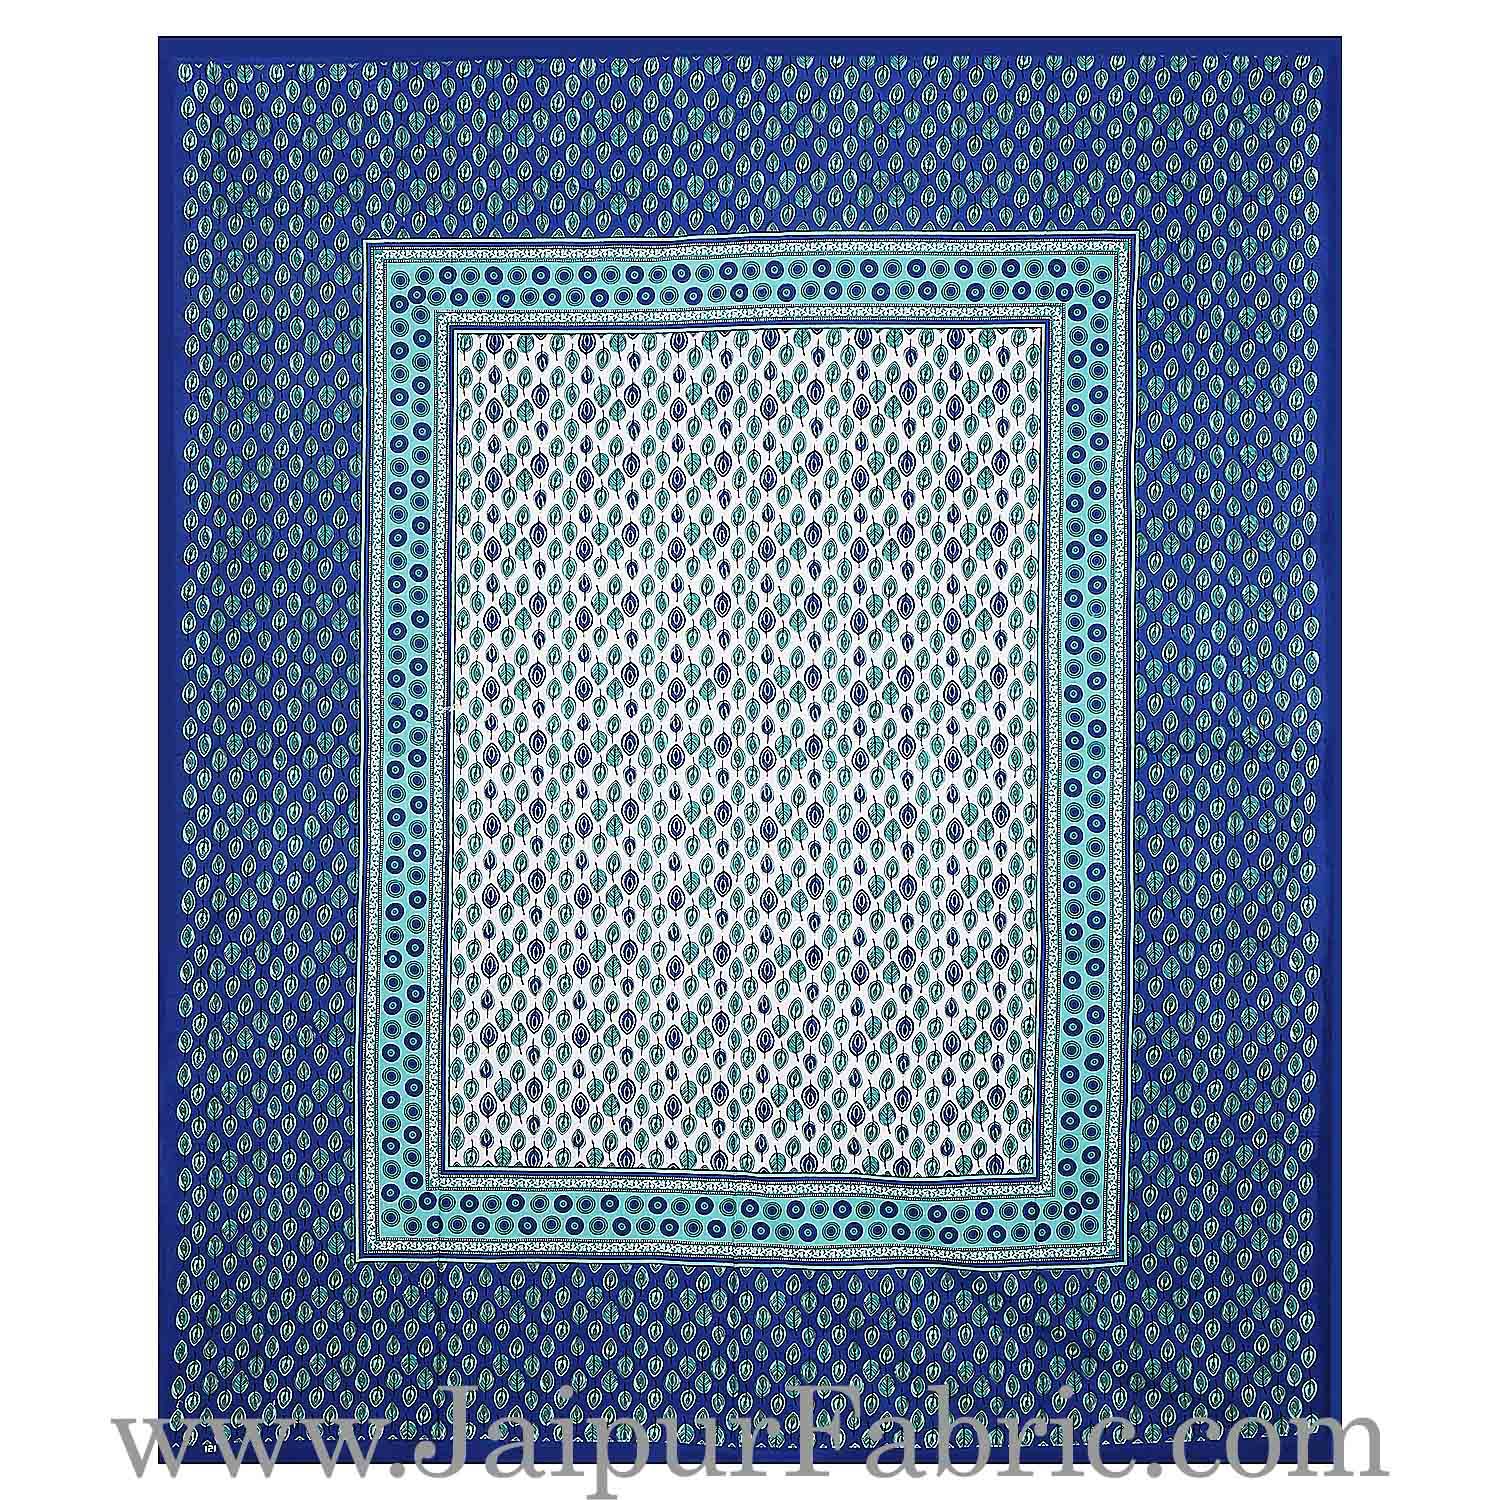 Blue Border Leaf Pattern Screen Print Cotton Double Bed Sheet